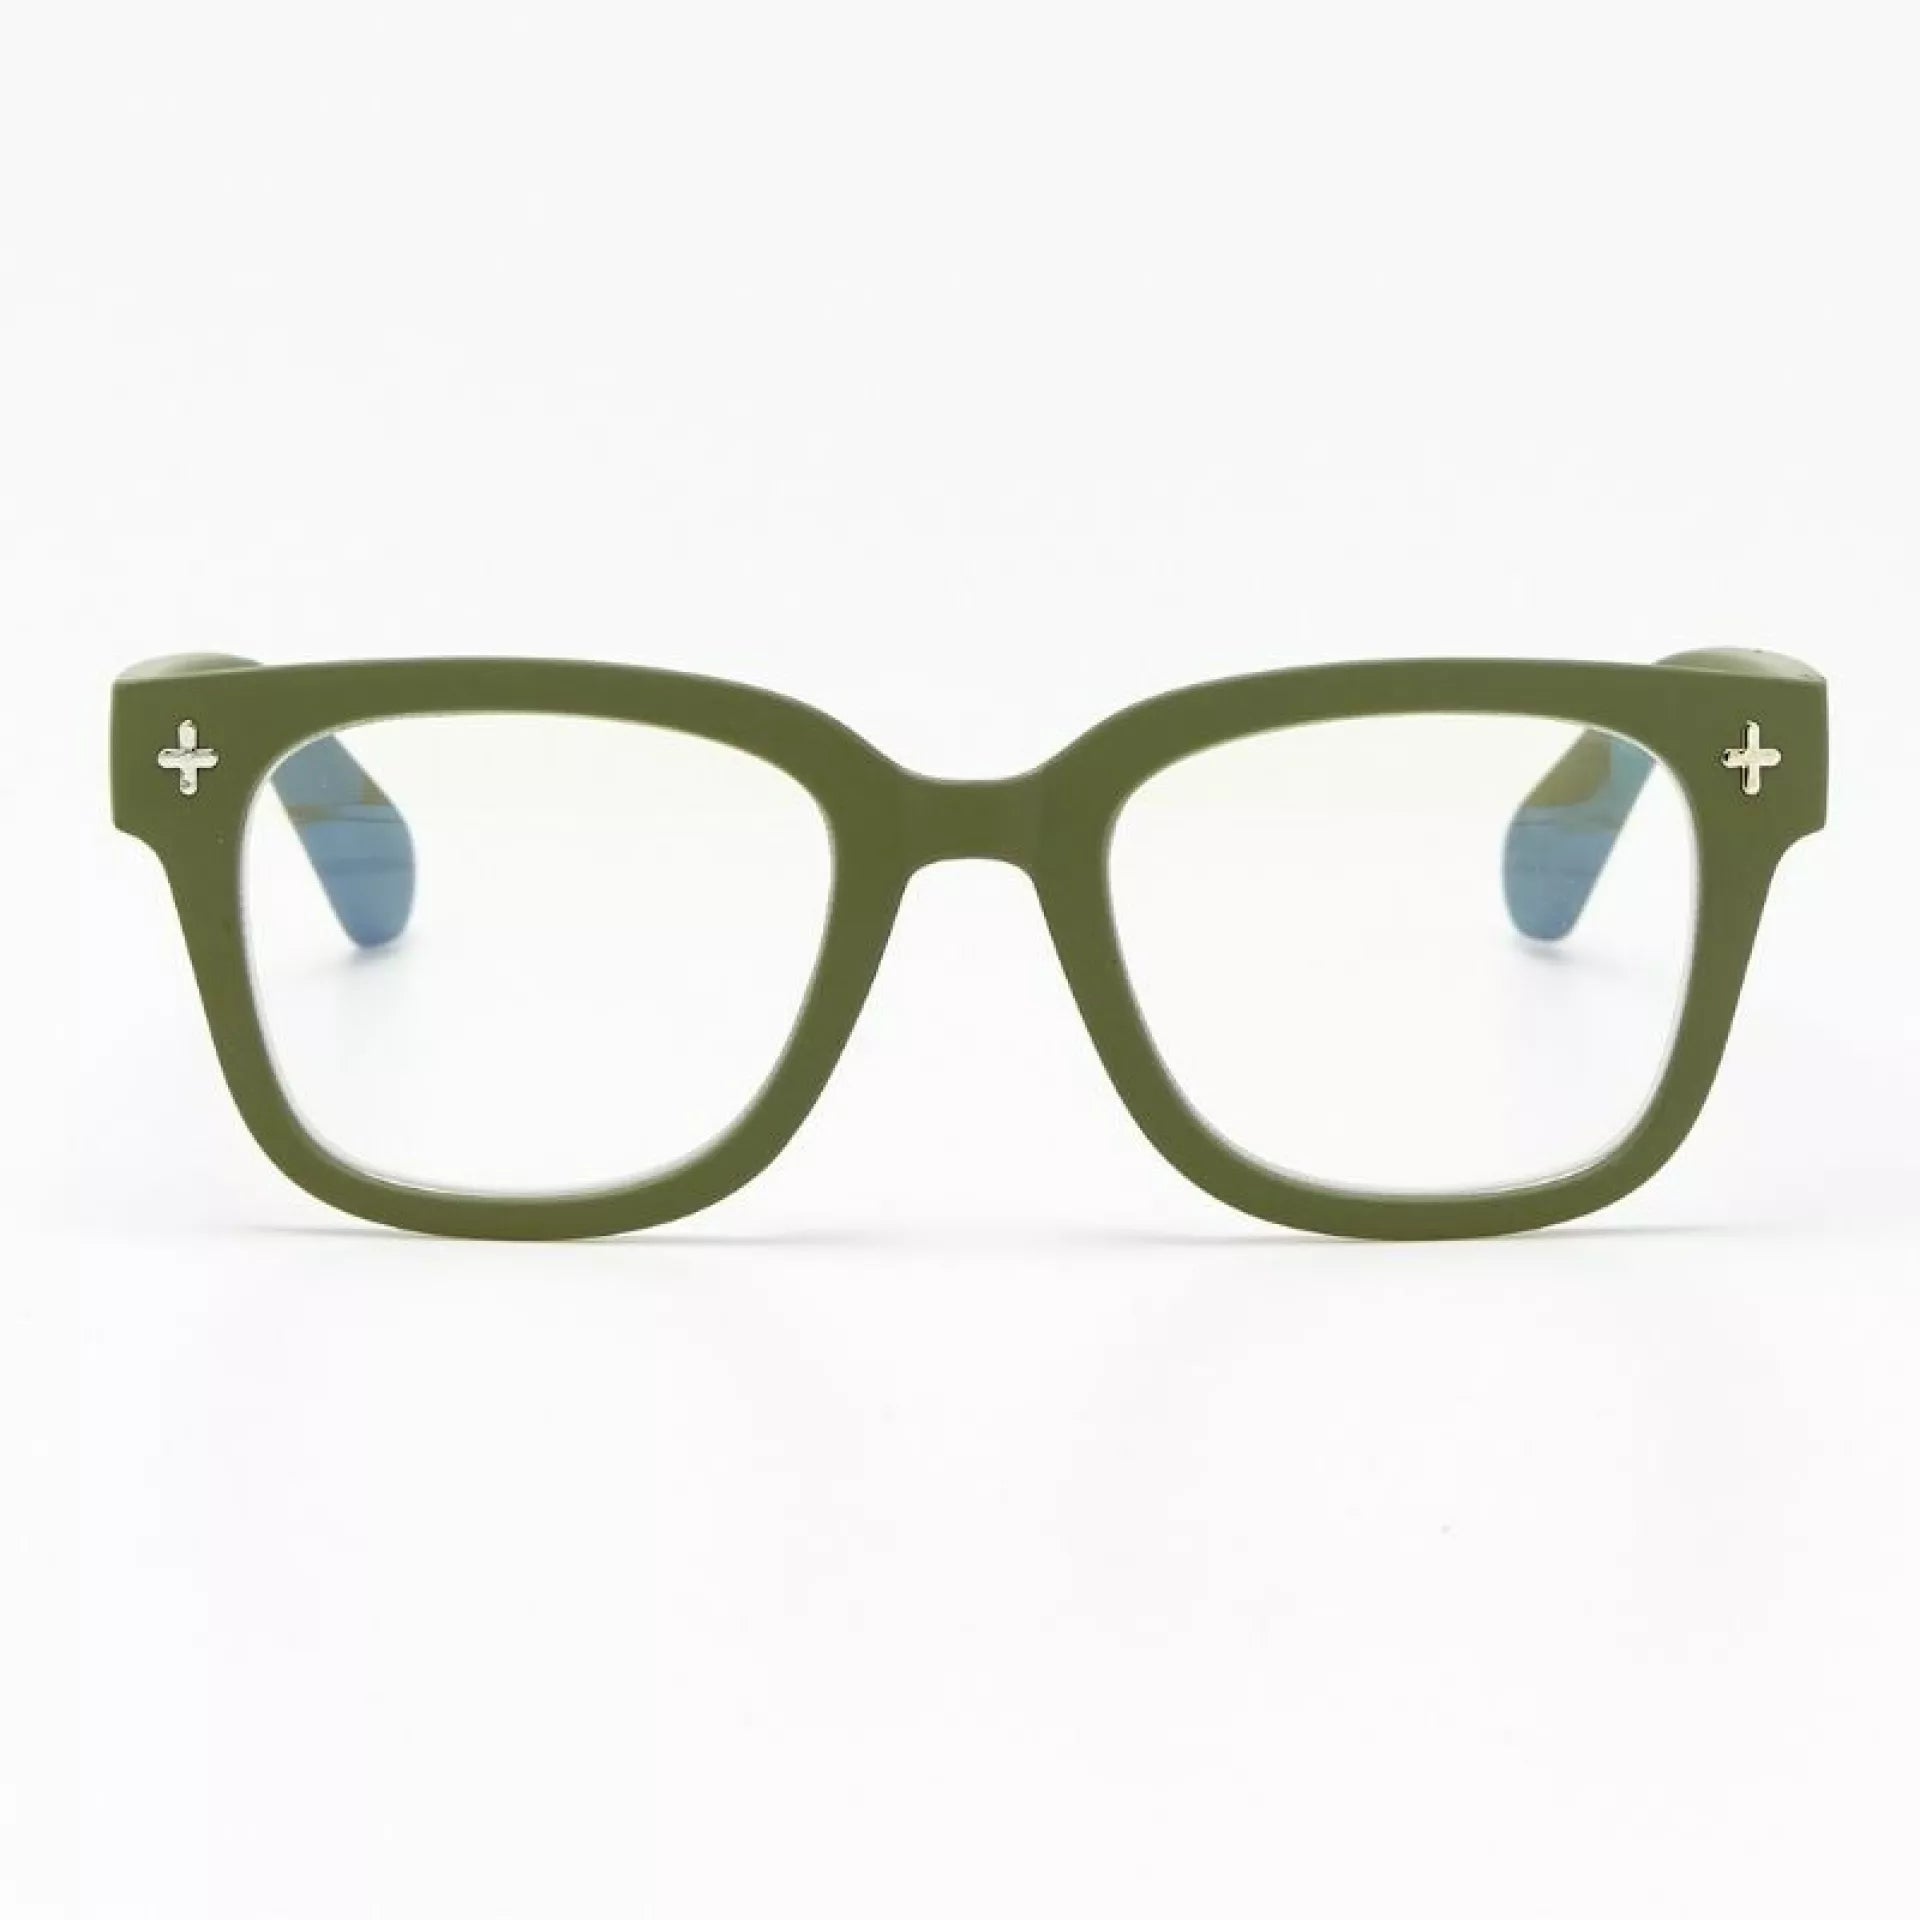 Fabulous Gifts Okkia Reading Glasses Nero Verde 2.00 by Weirs of Baggot Street